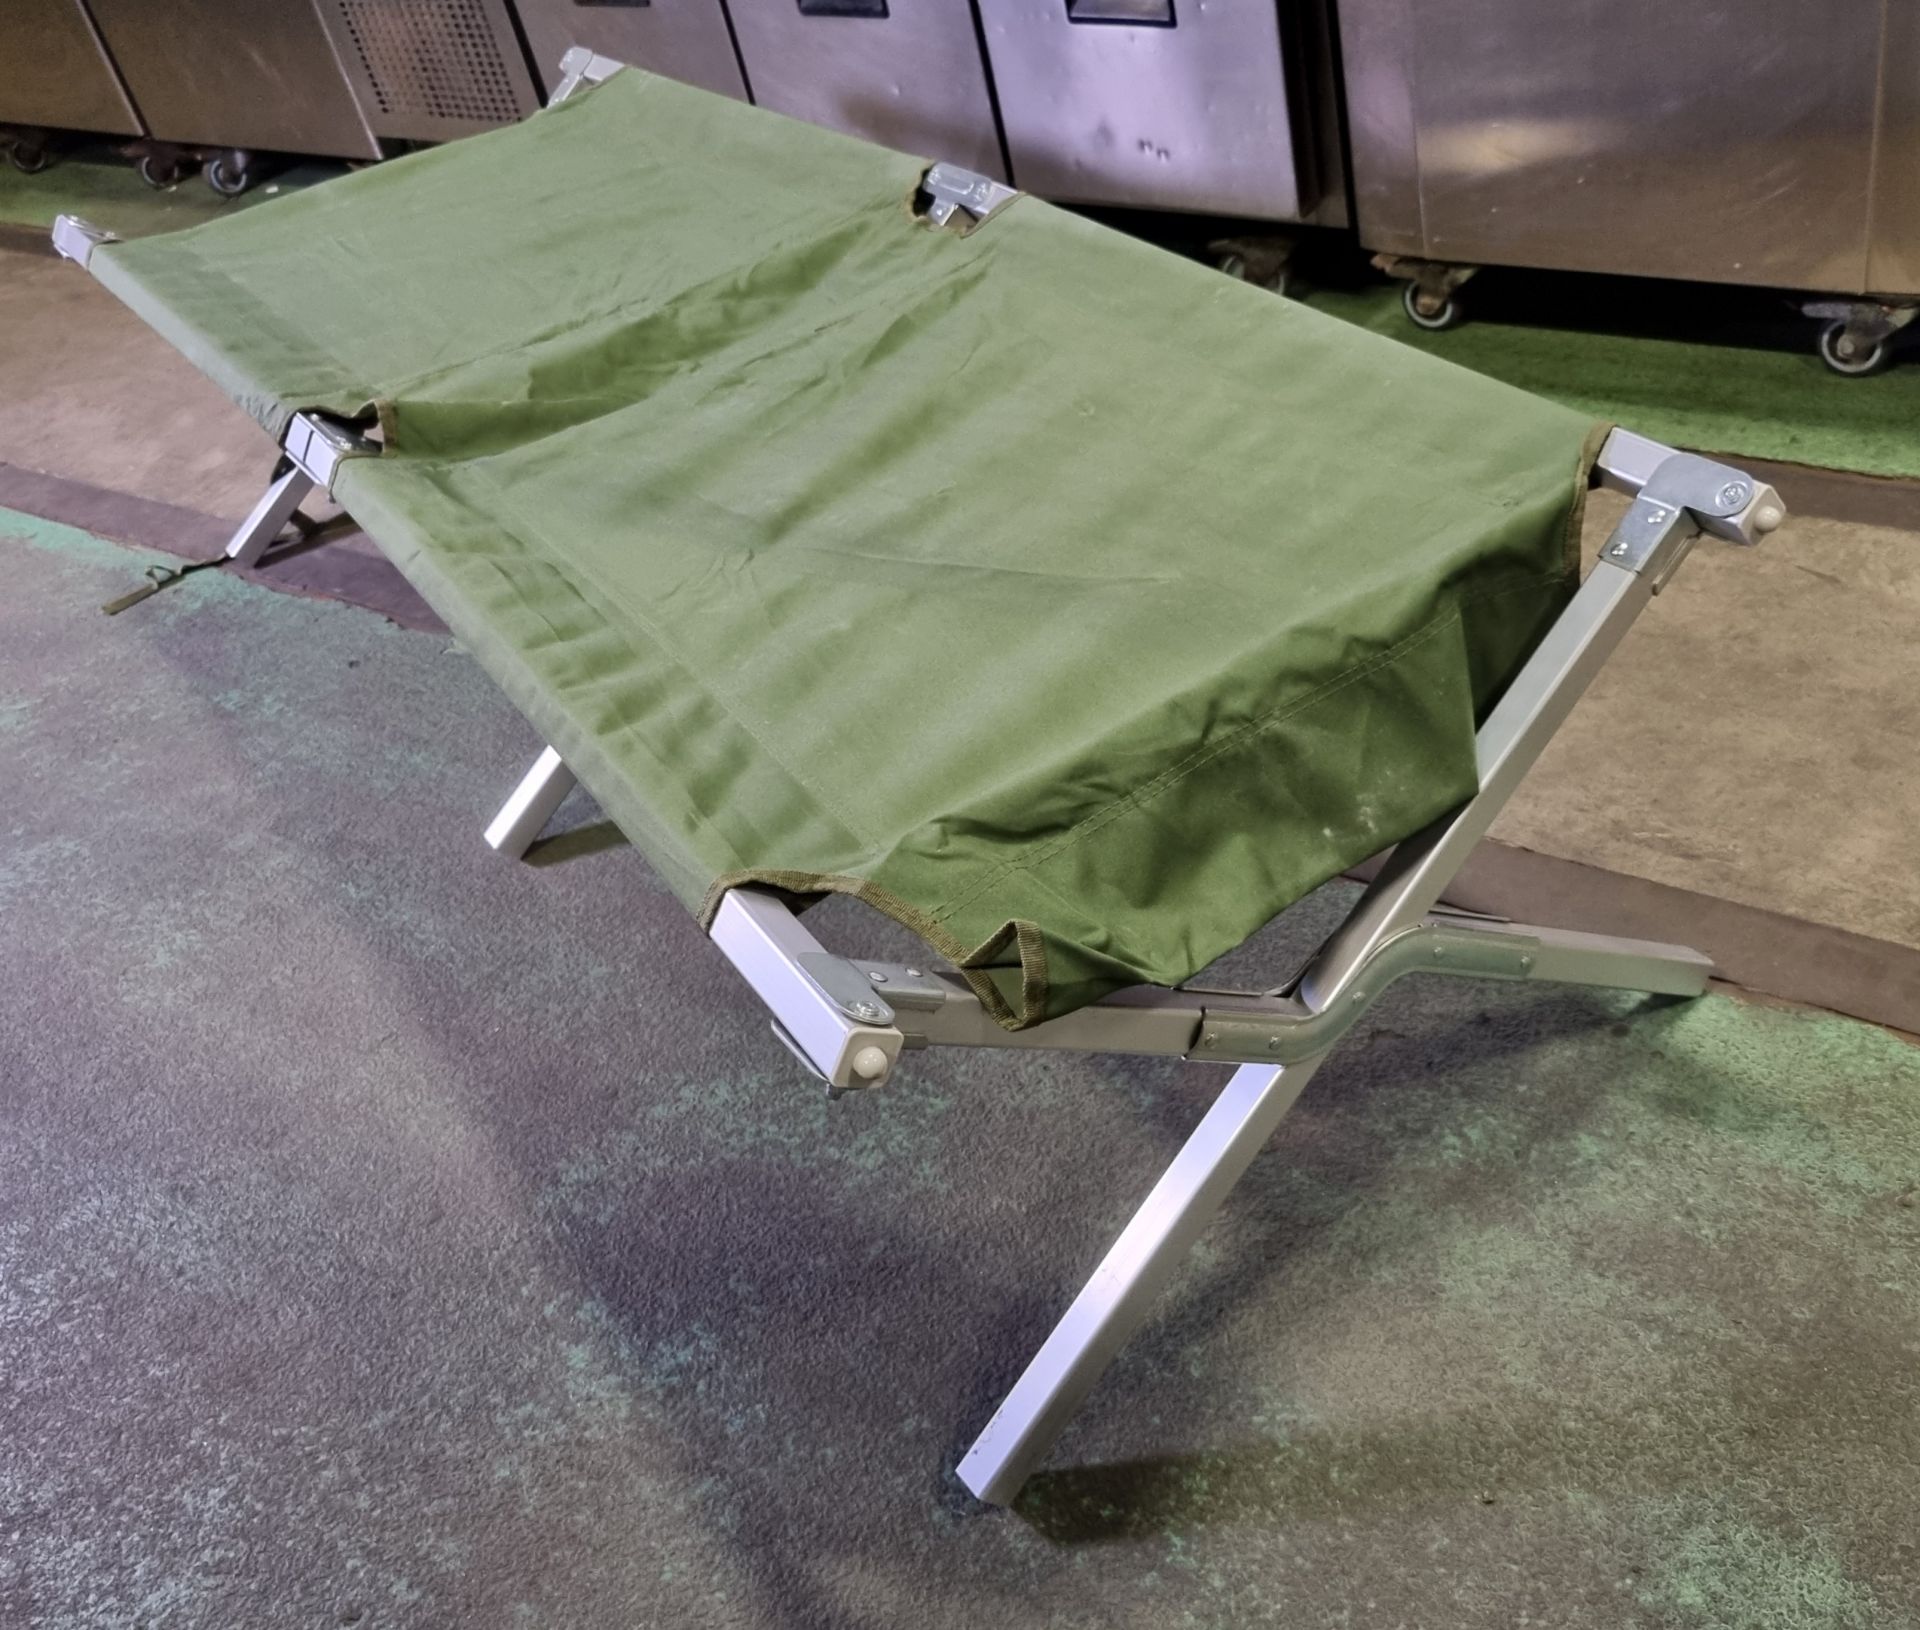 15x Folding field cots with carry bag - L 1900 x W 700 x H 450mm - Image 5 of 5